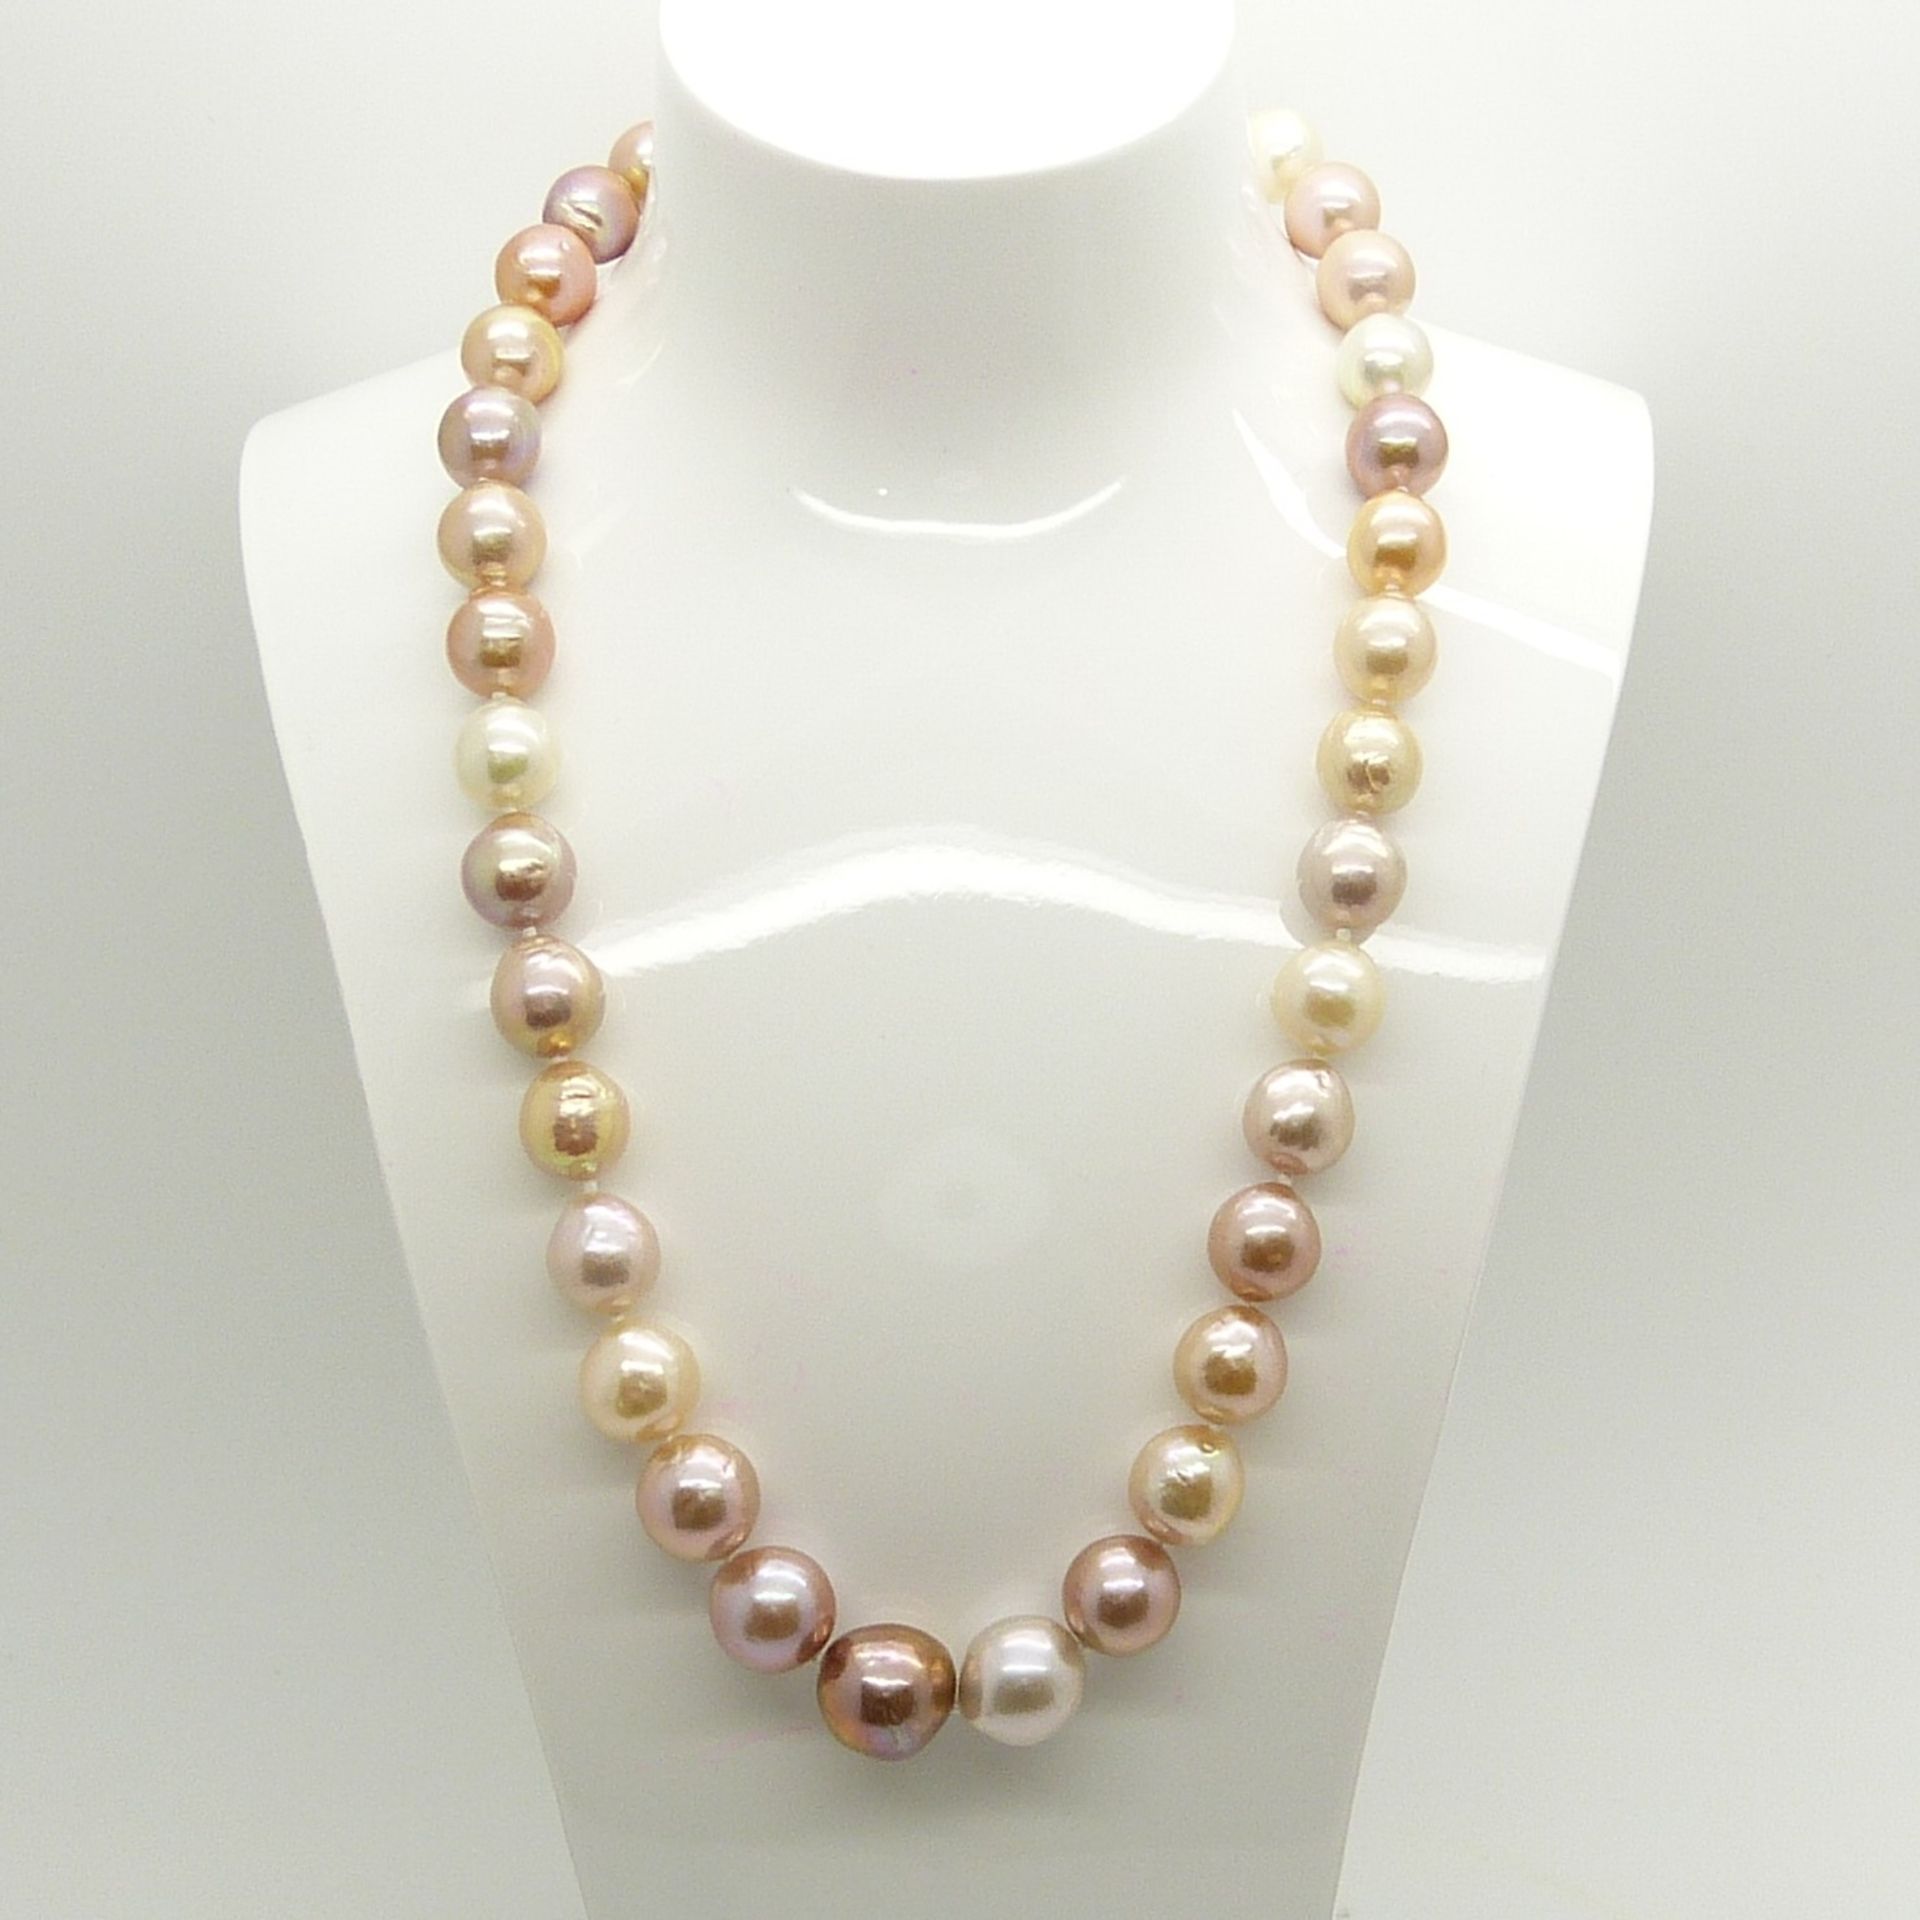 A necklace strung with peach, white, champagne and grey freshwater pearls with 9ct yellow gold clasp - Image 3 of 6